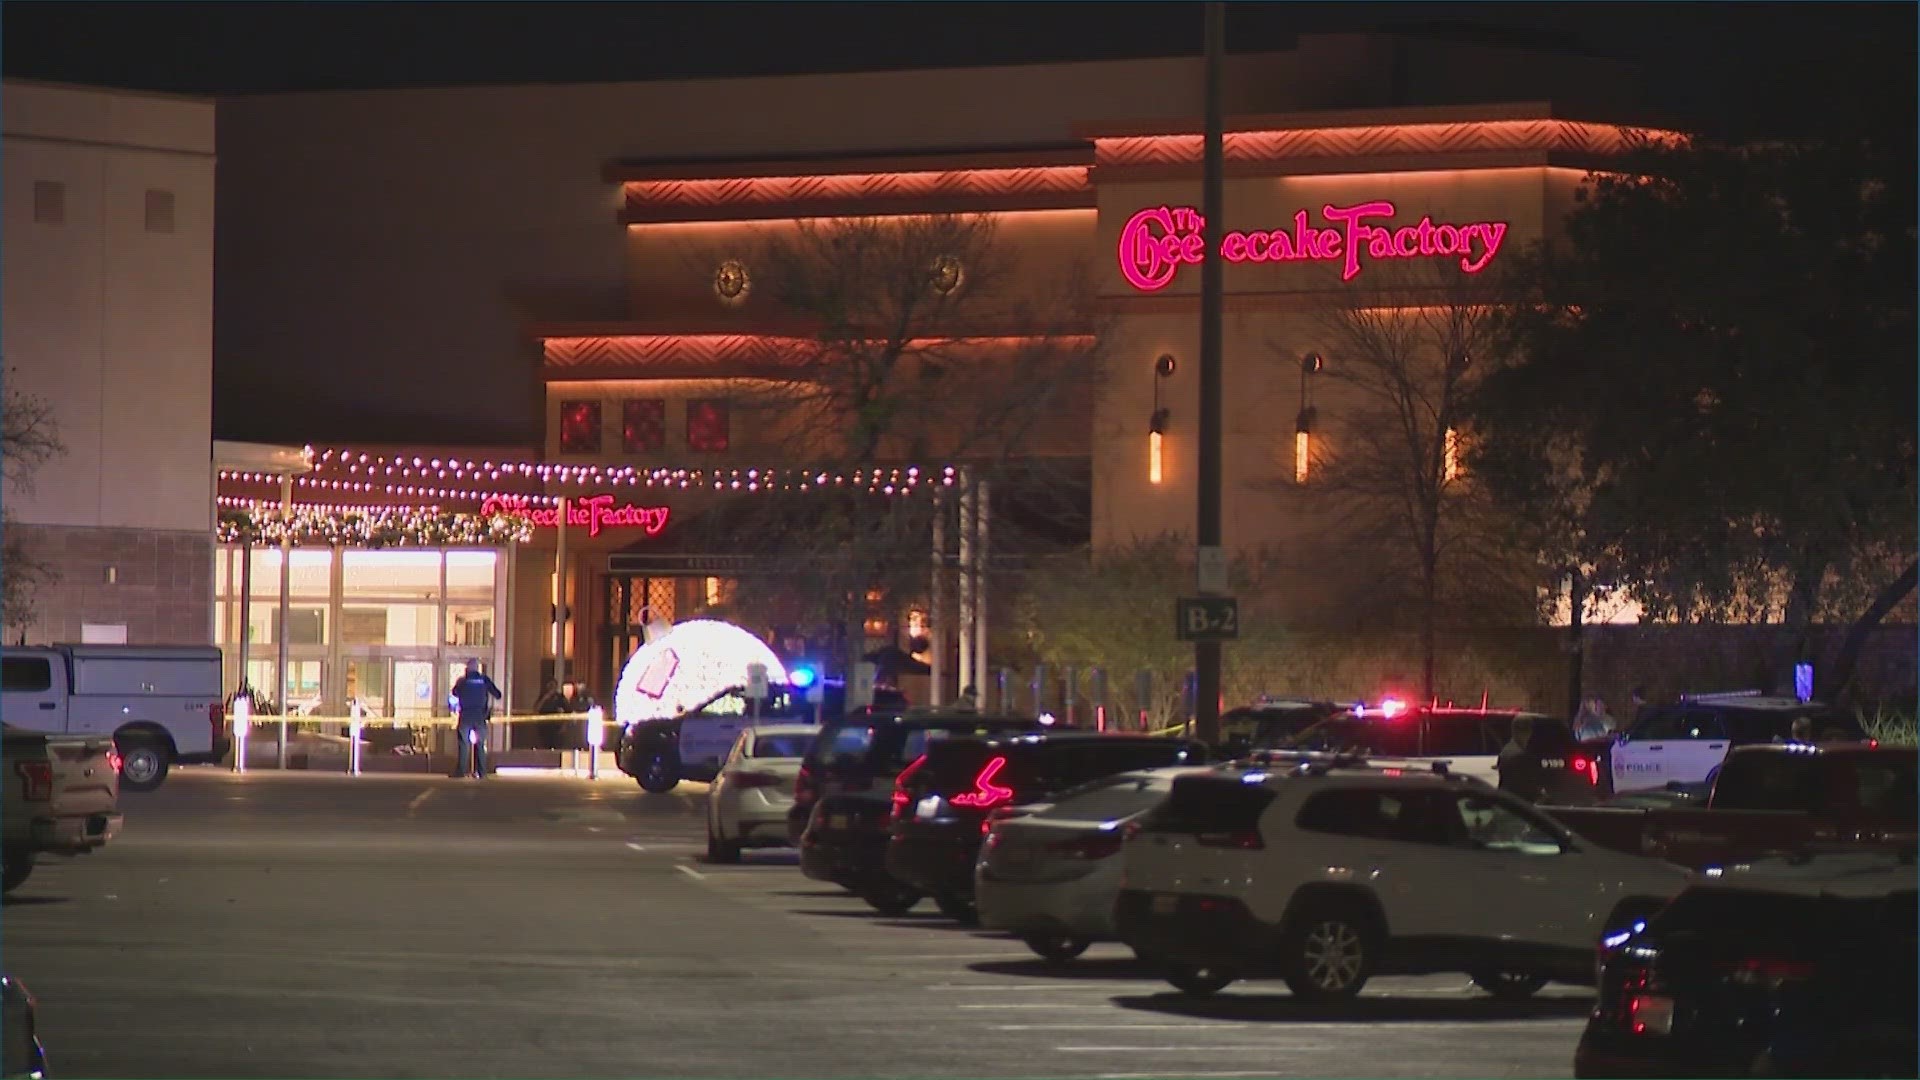 Witnesses inside the mall said they heard multiple gunshots which caused them to run and leave personal stuff behind.